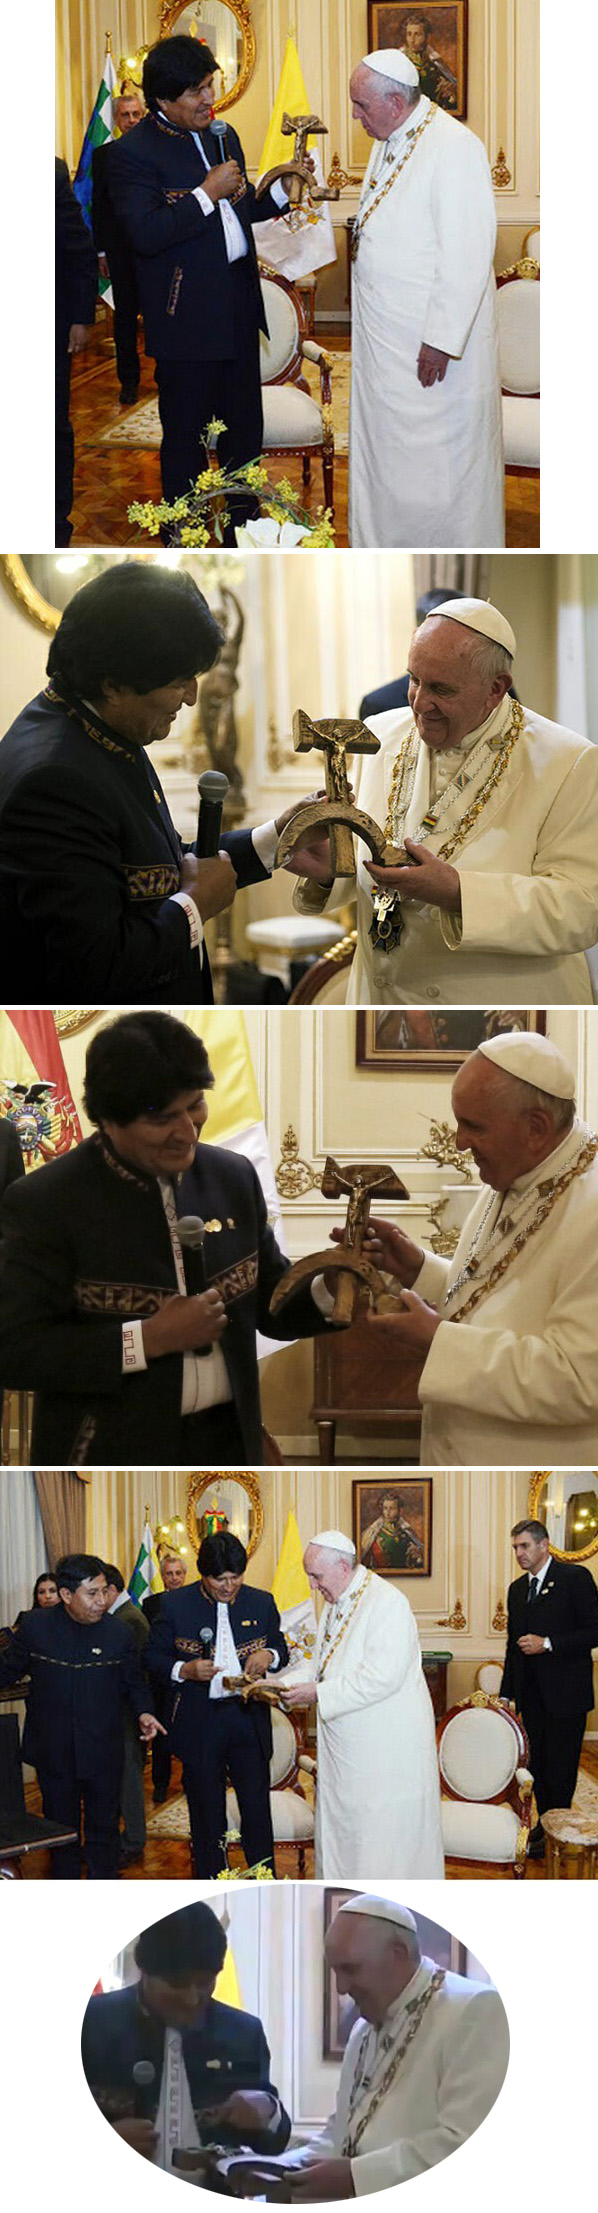 Pope holds hammer &amp; sickle 2